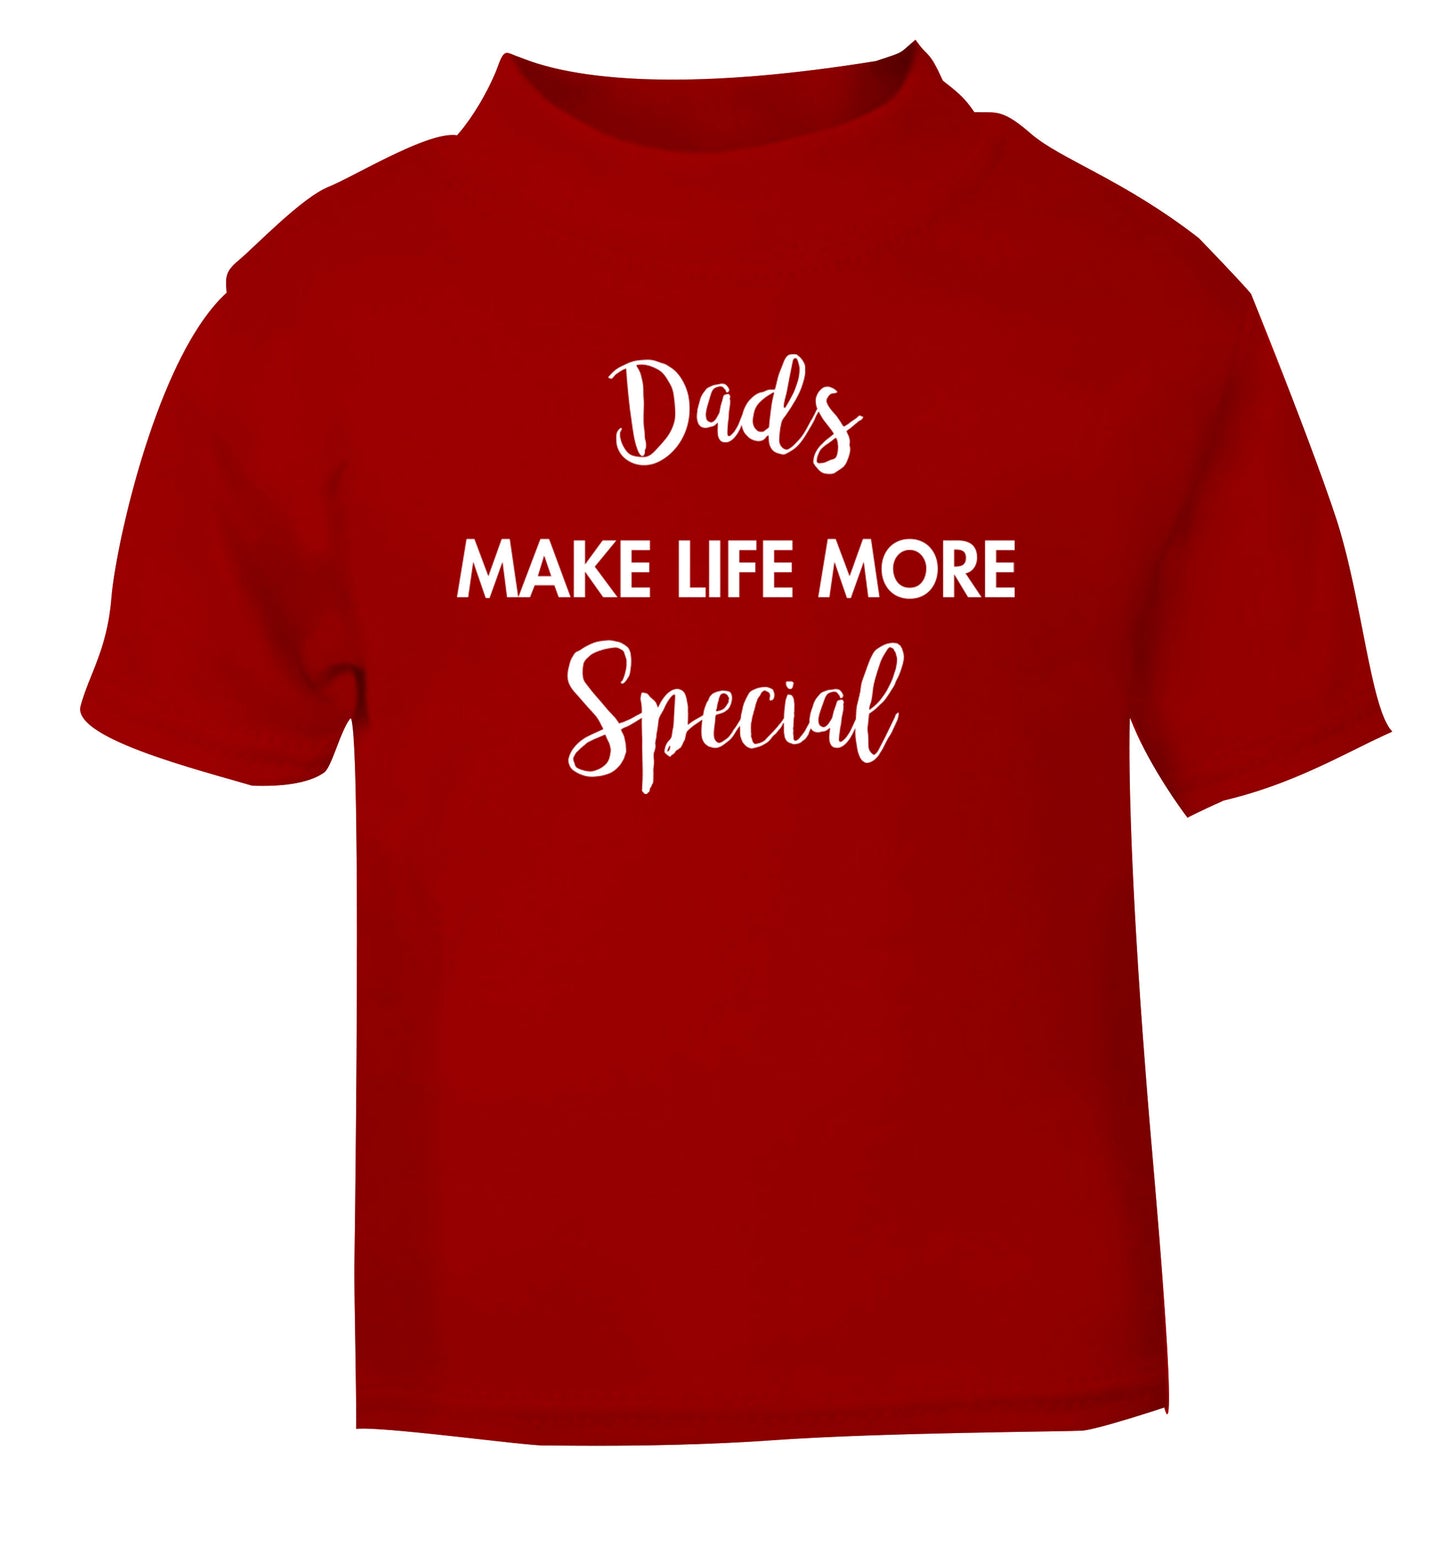 Dads make life more special red Baby Toddler Tshirt 2 Years